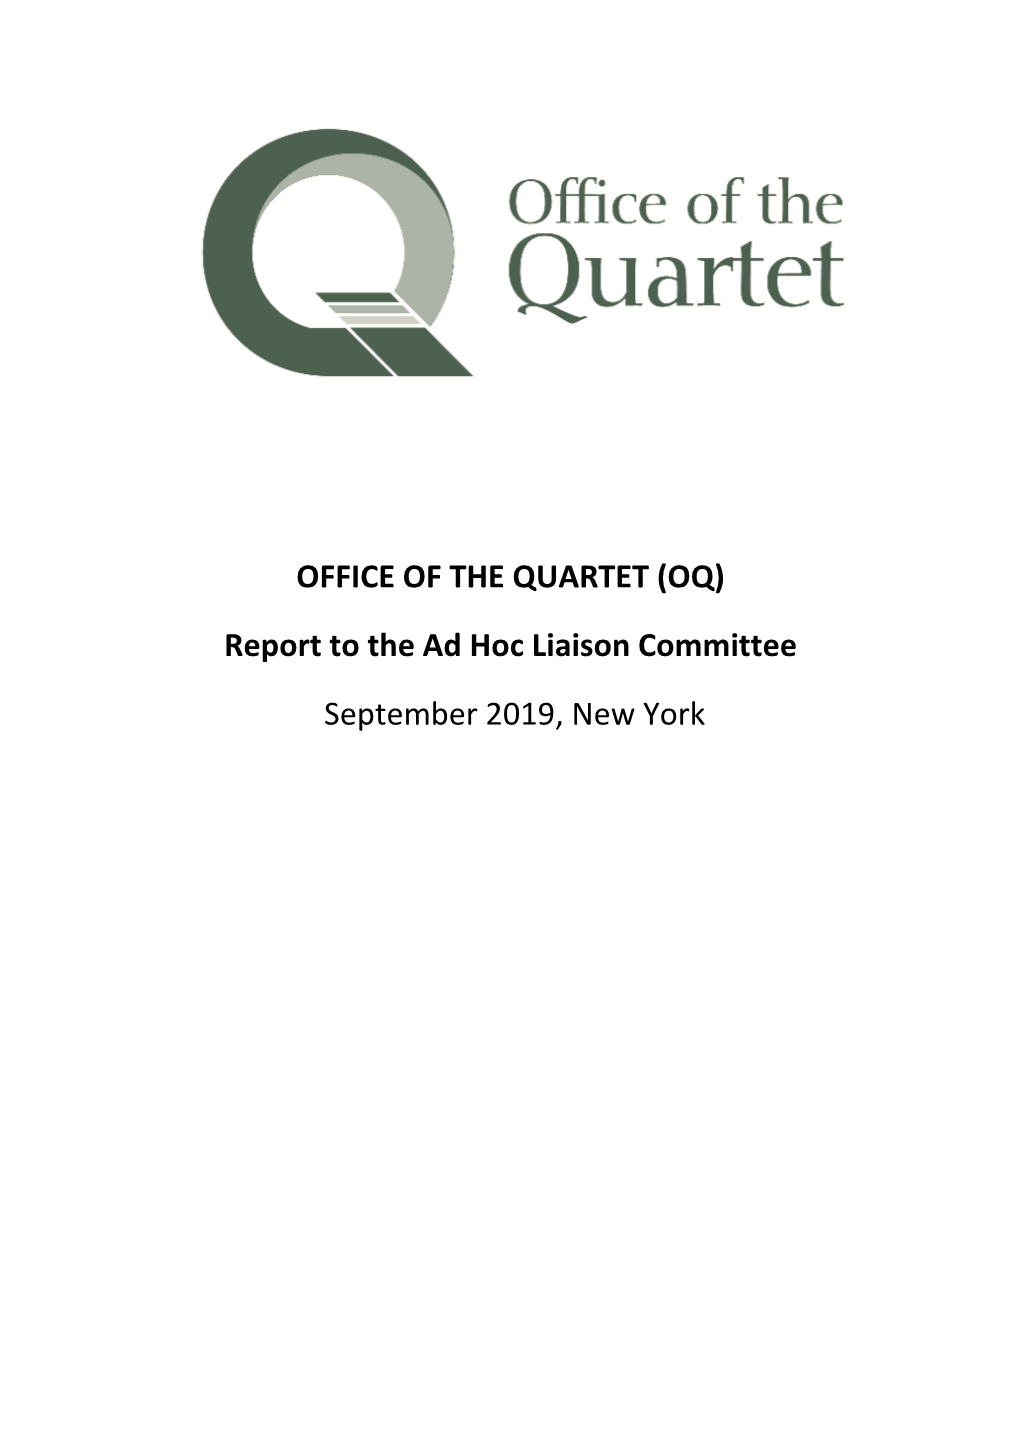 (OQ) Report to the Ad Hoc Liaison Committee September 2019, New York